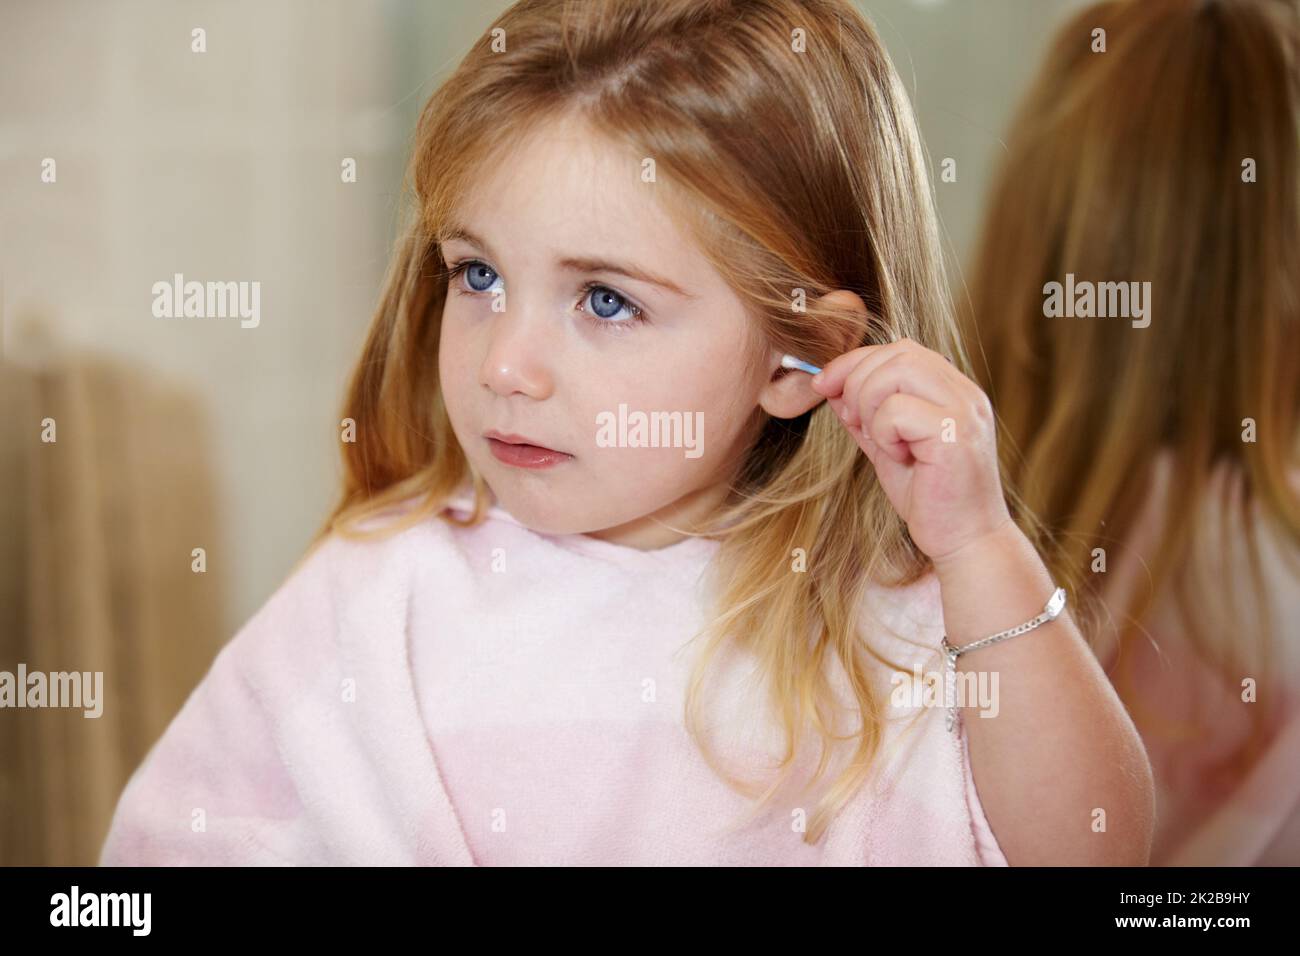 Making sure she cleans properly. Cute little girl cleaning her ears with an earbud. Stock Photo